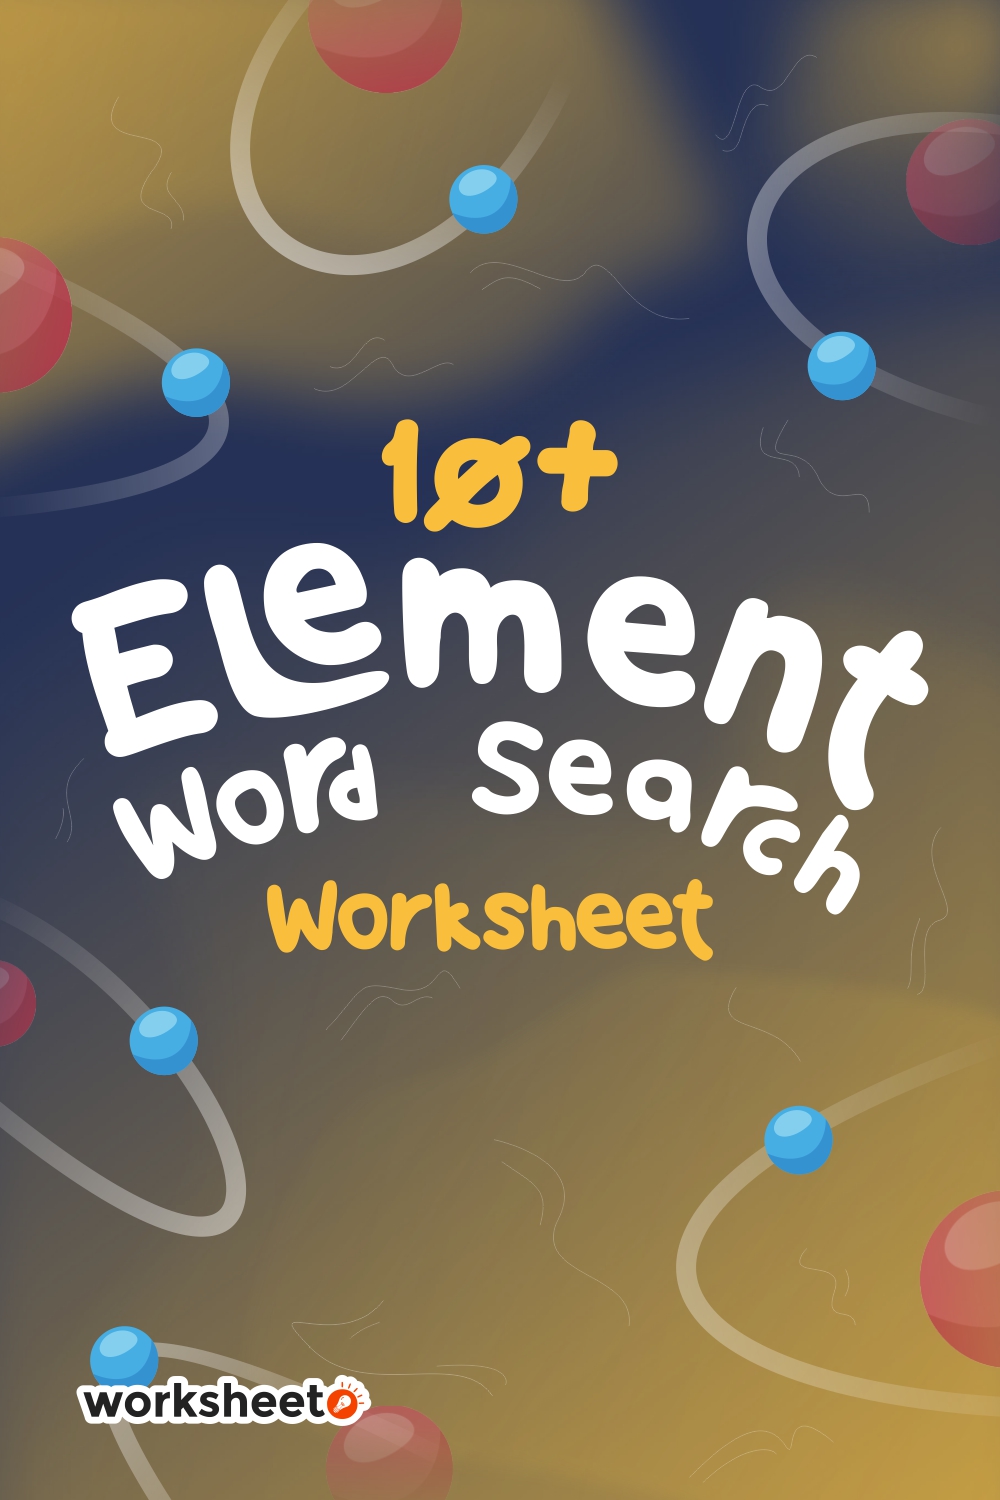 15 Images of Element Word Search Worksheet